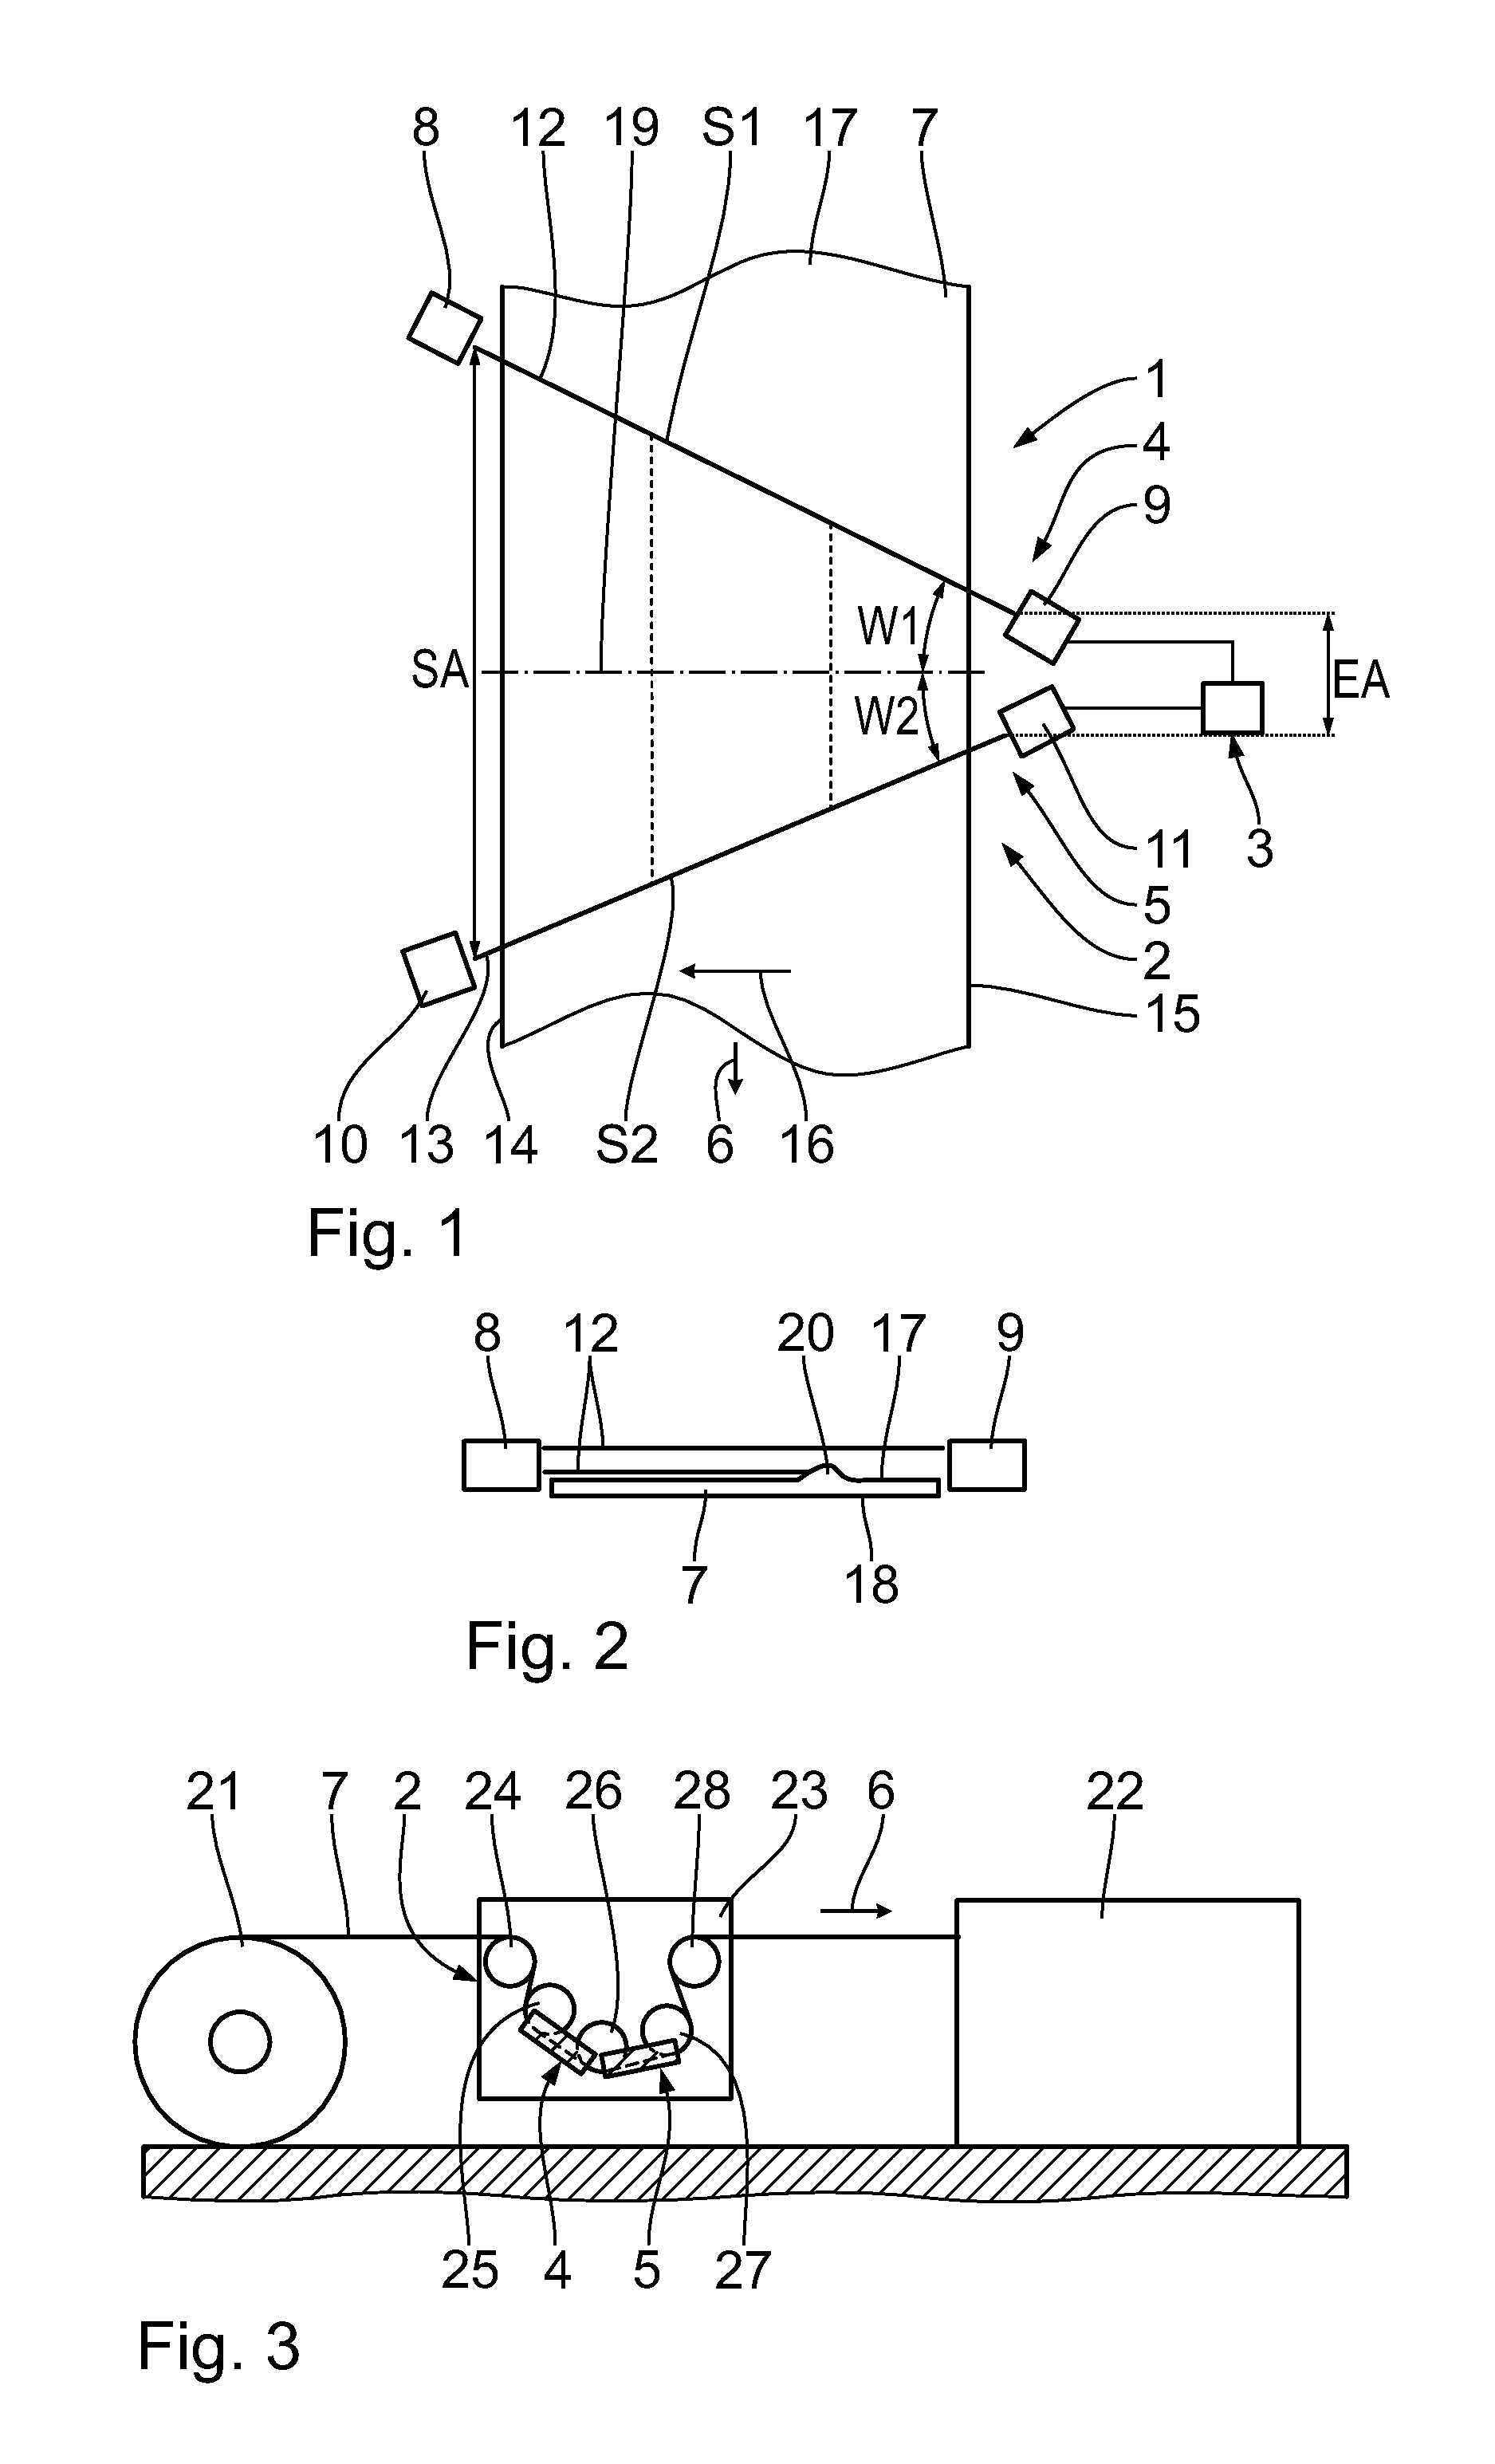 Installation for processing a paper web or corrugated cardboard web